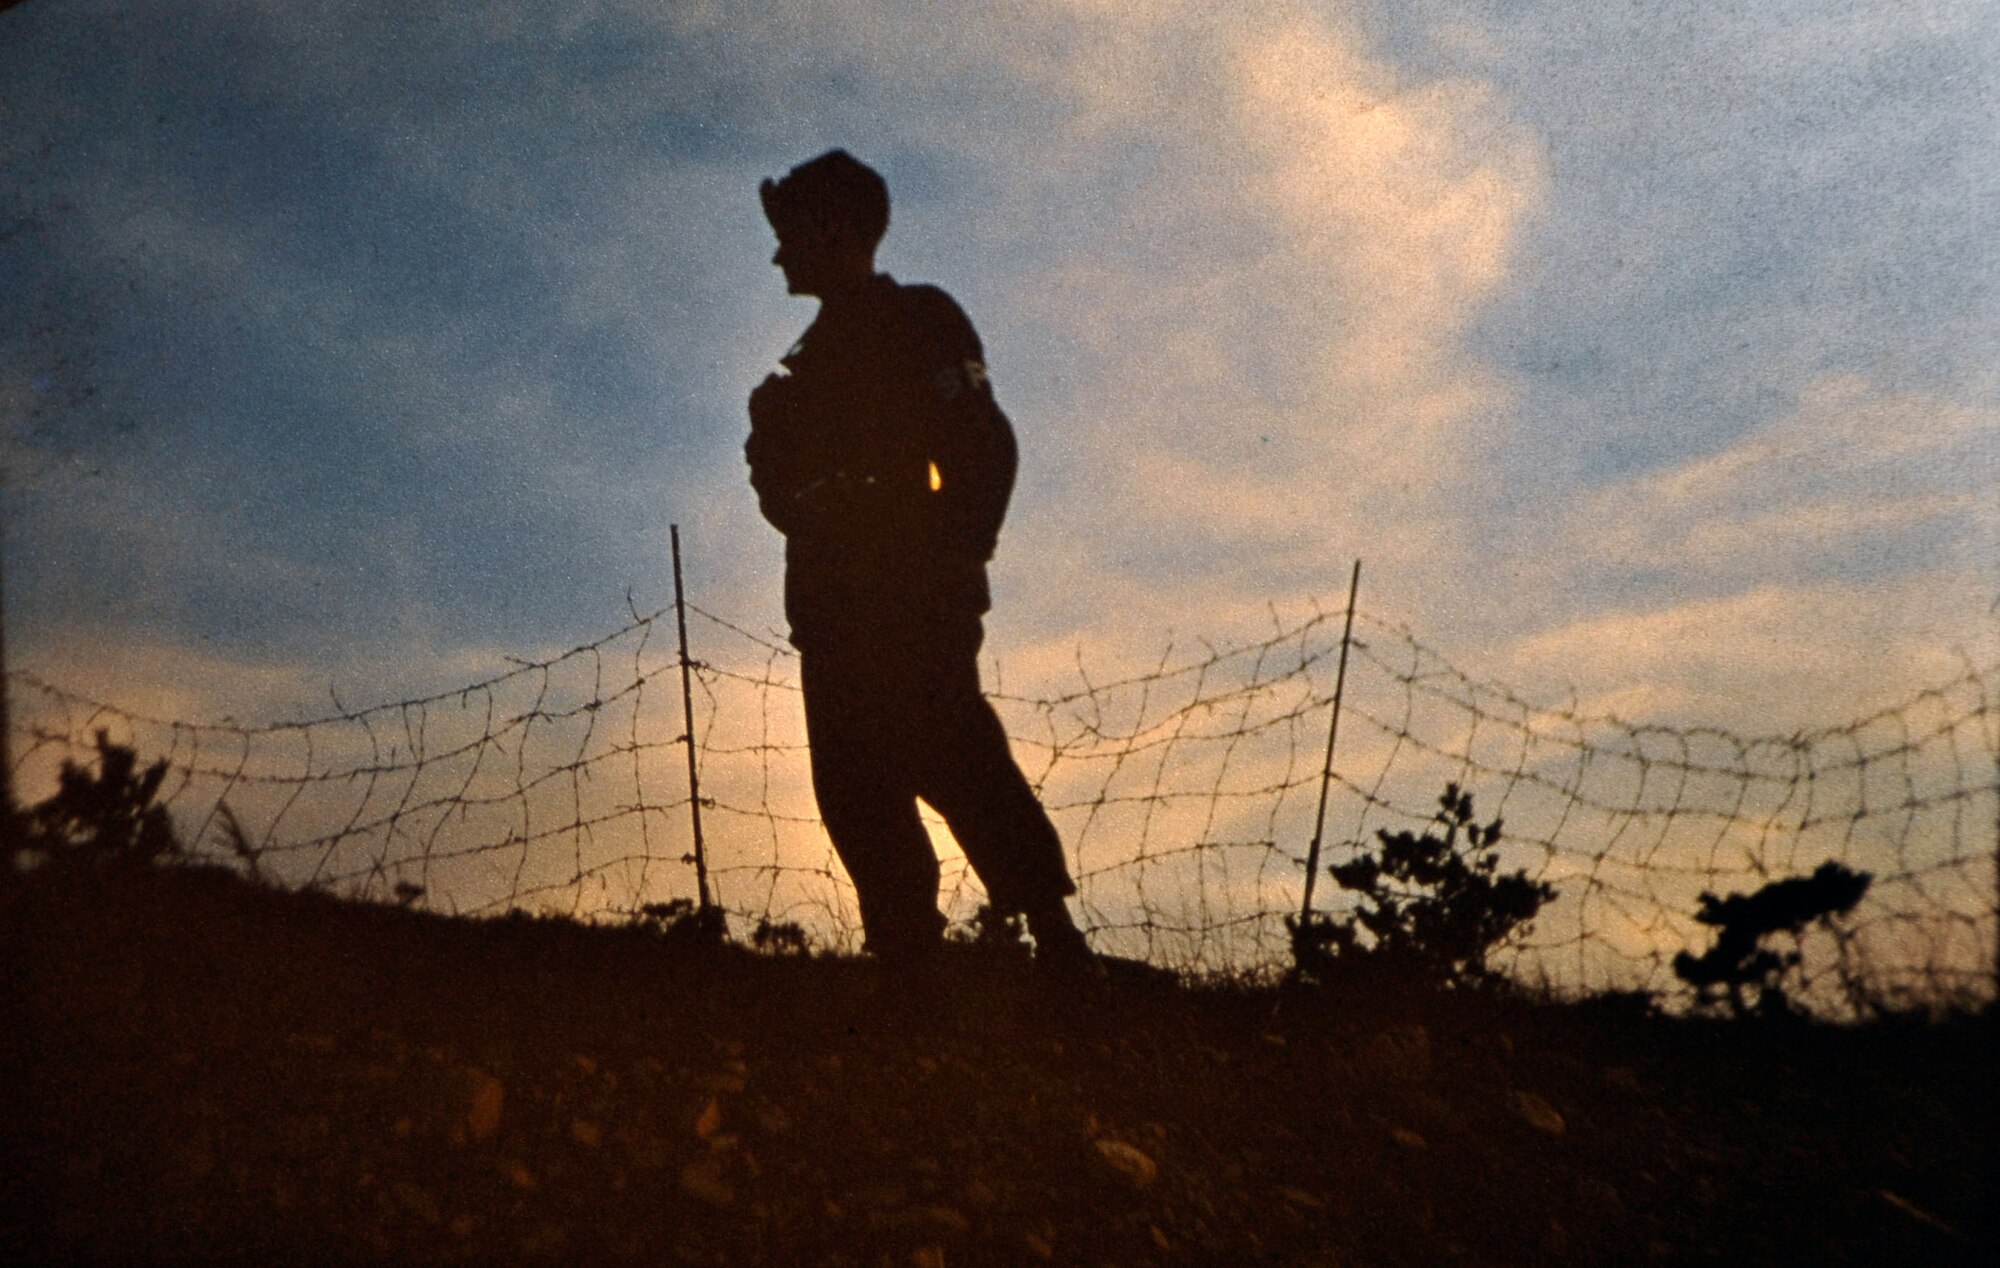 A guard patrols inside of a compound near the 38th parallel in South Korea. Retired U.S. Army Maj. E. Vernon Smith Jr. used photography as a way to preserve memories of his experience during his rotation there from 1956-58. (Courtesy photo/Released) 